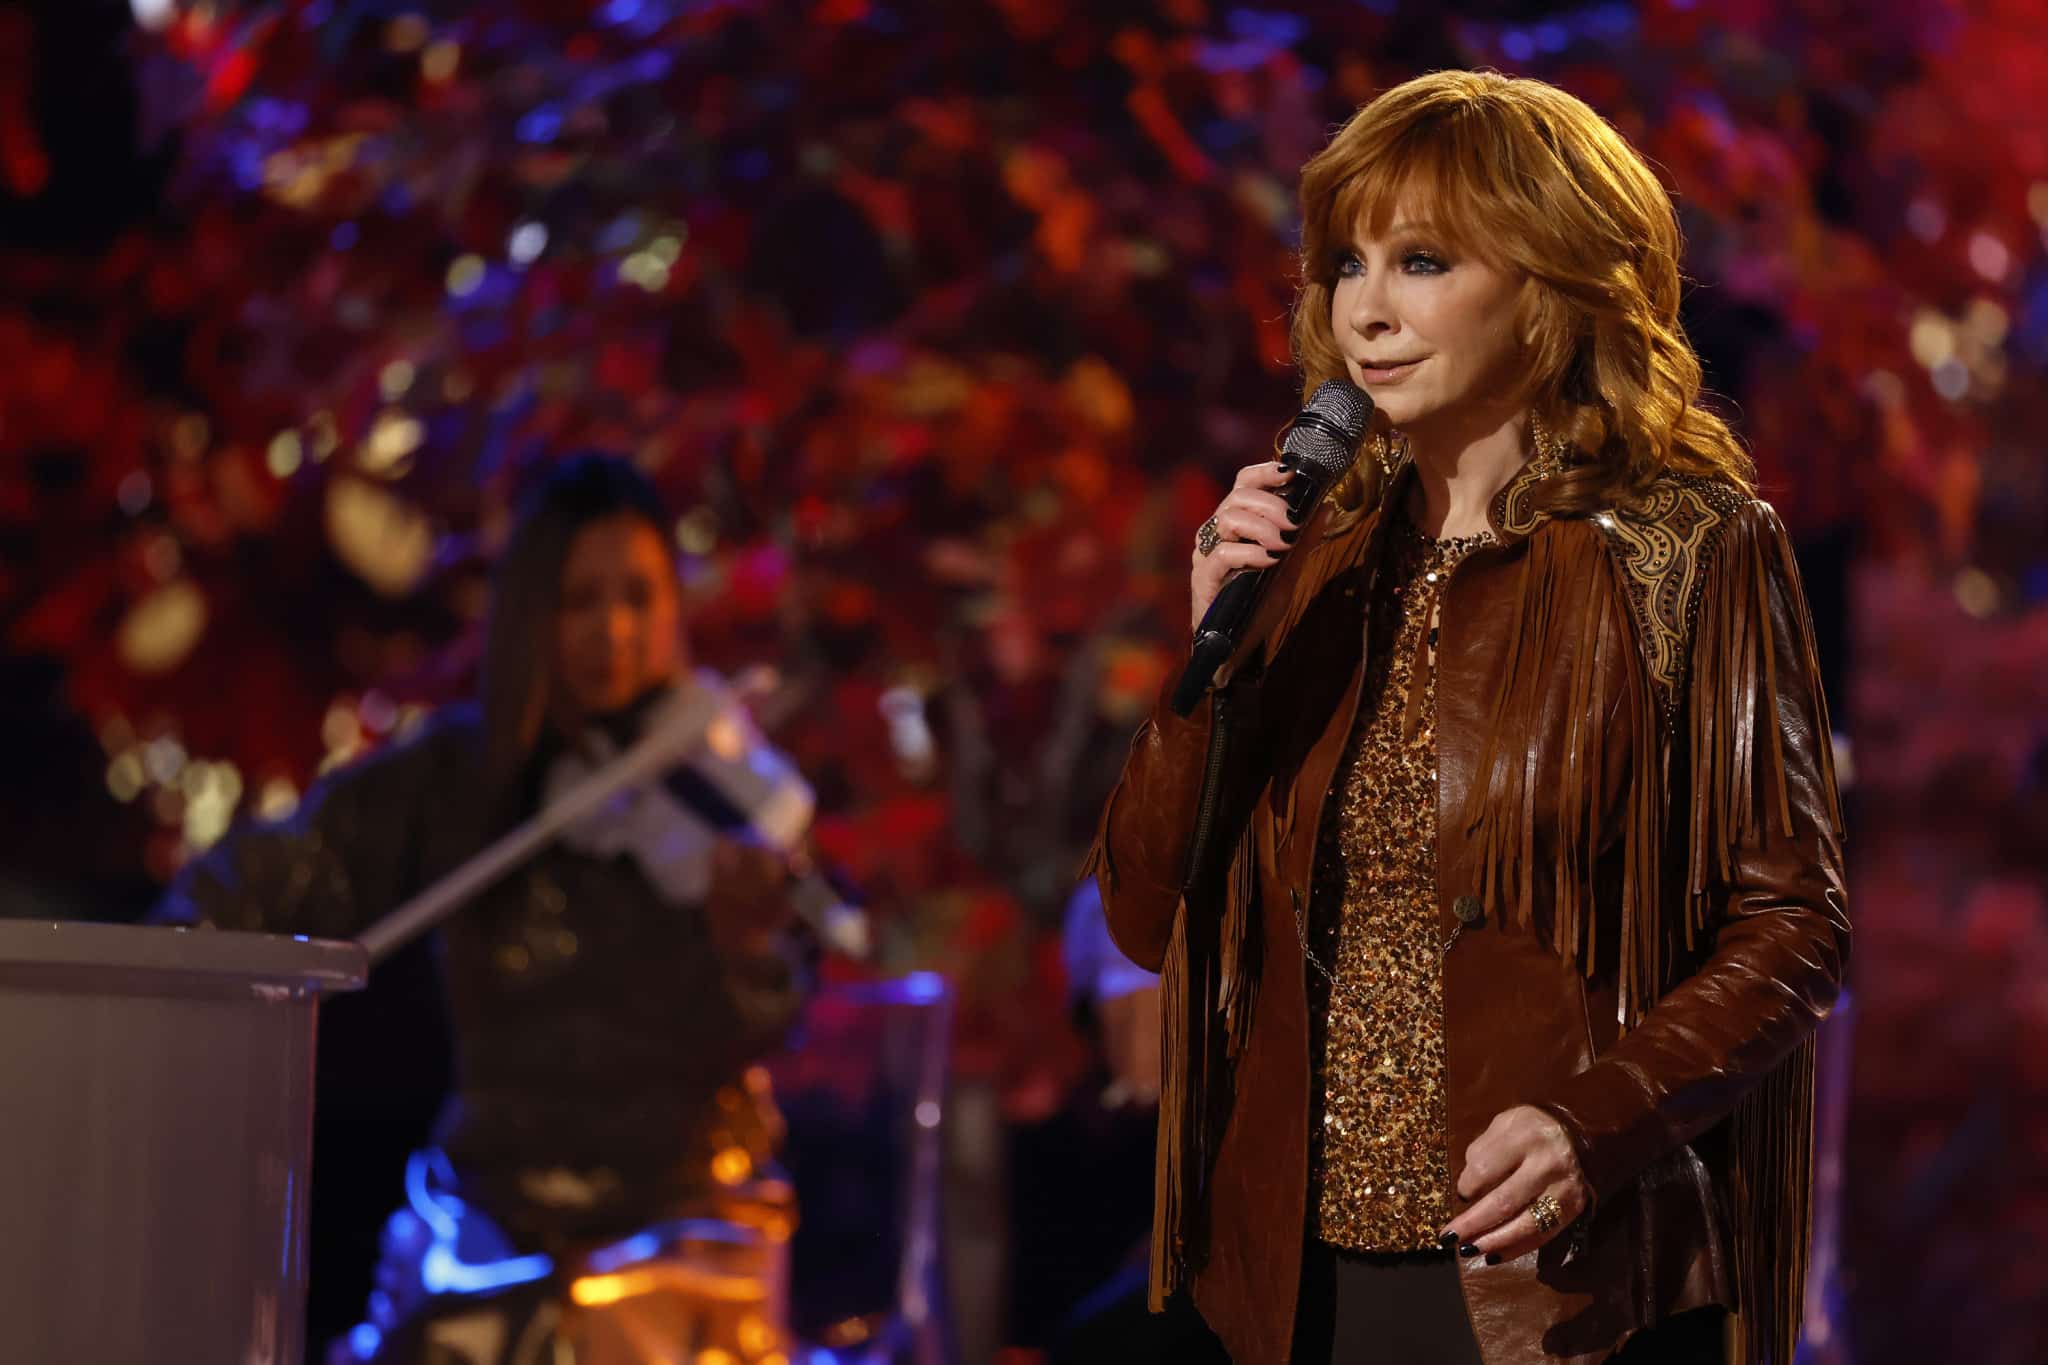 THE VOICE -- "Live Top 12 Results" Episode 2420B -- Pictured: Reba McEntire -- (Photo by: Trae Patton/NBC via Getty Images)